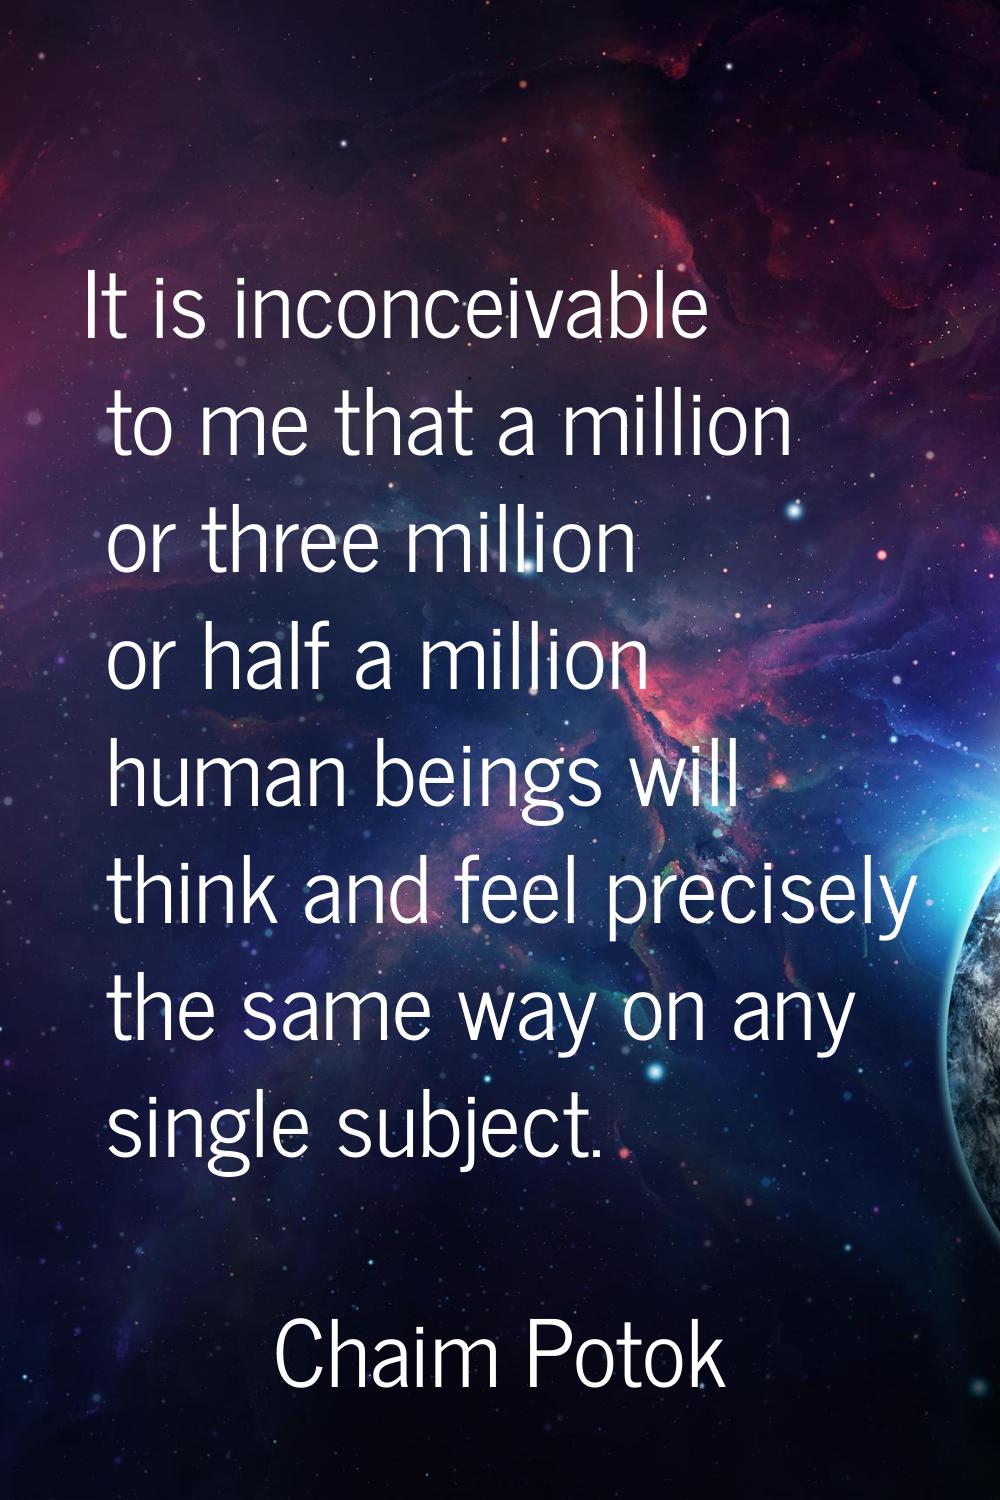 It is inconceivable to me that a million or three million or half a million human beings will think